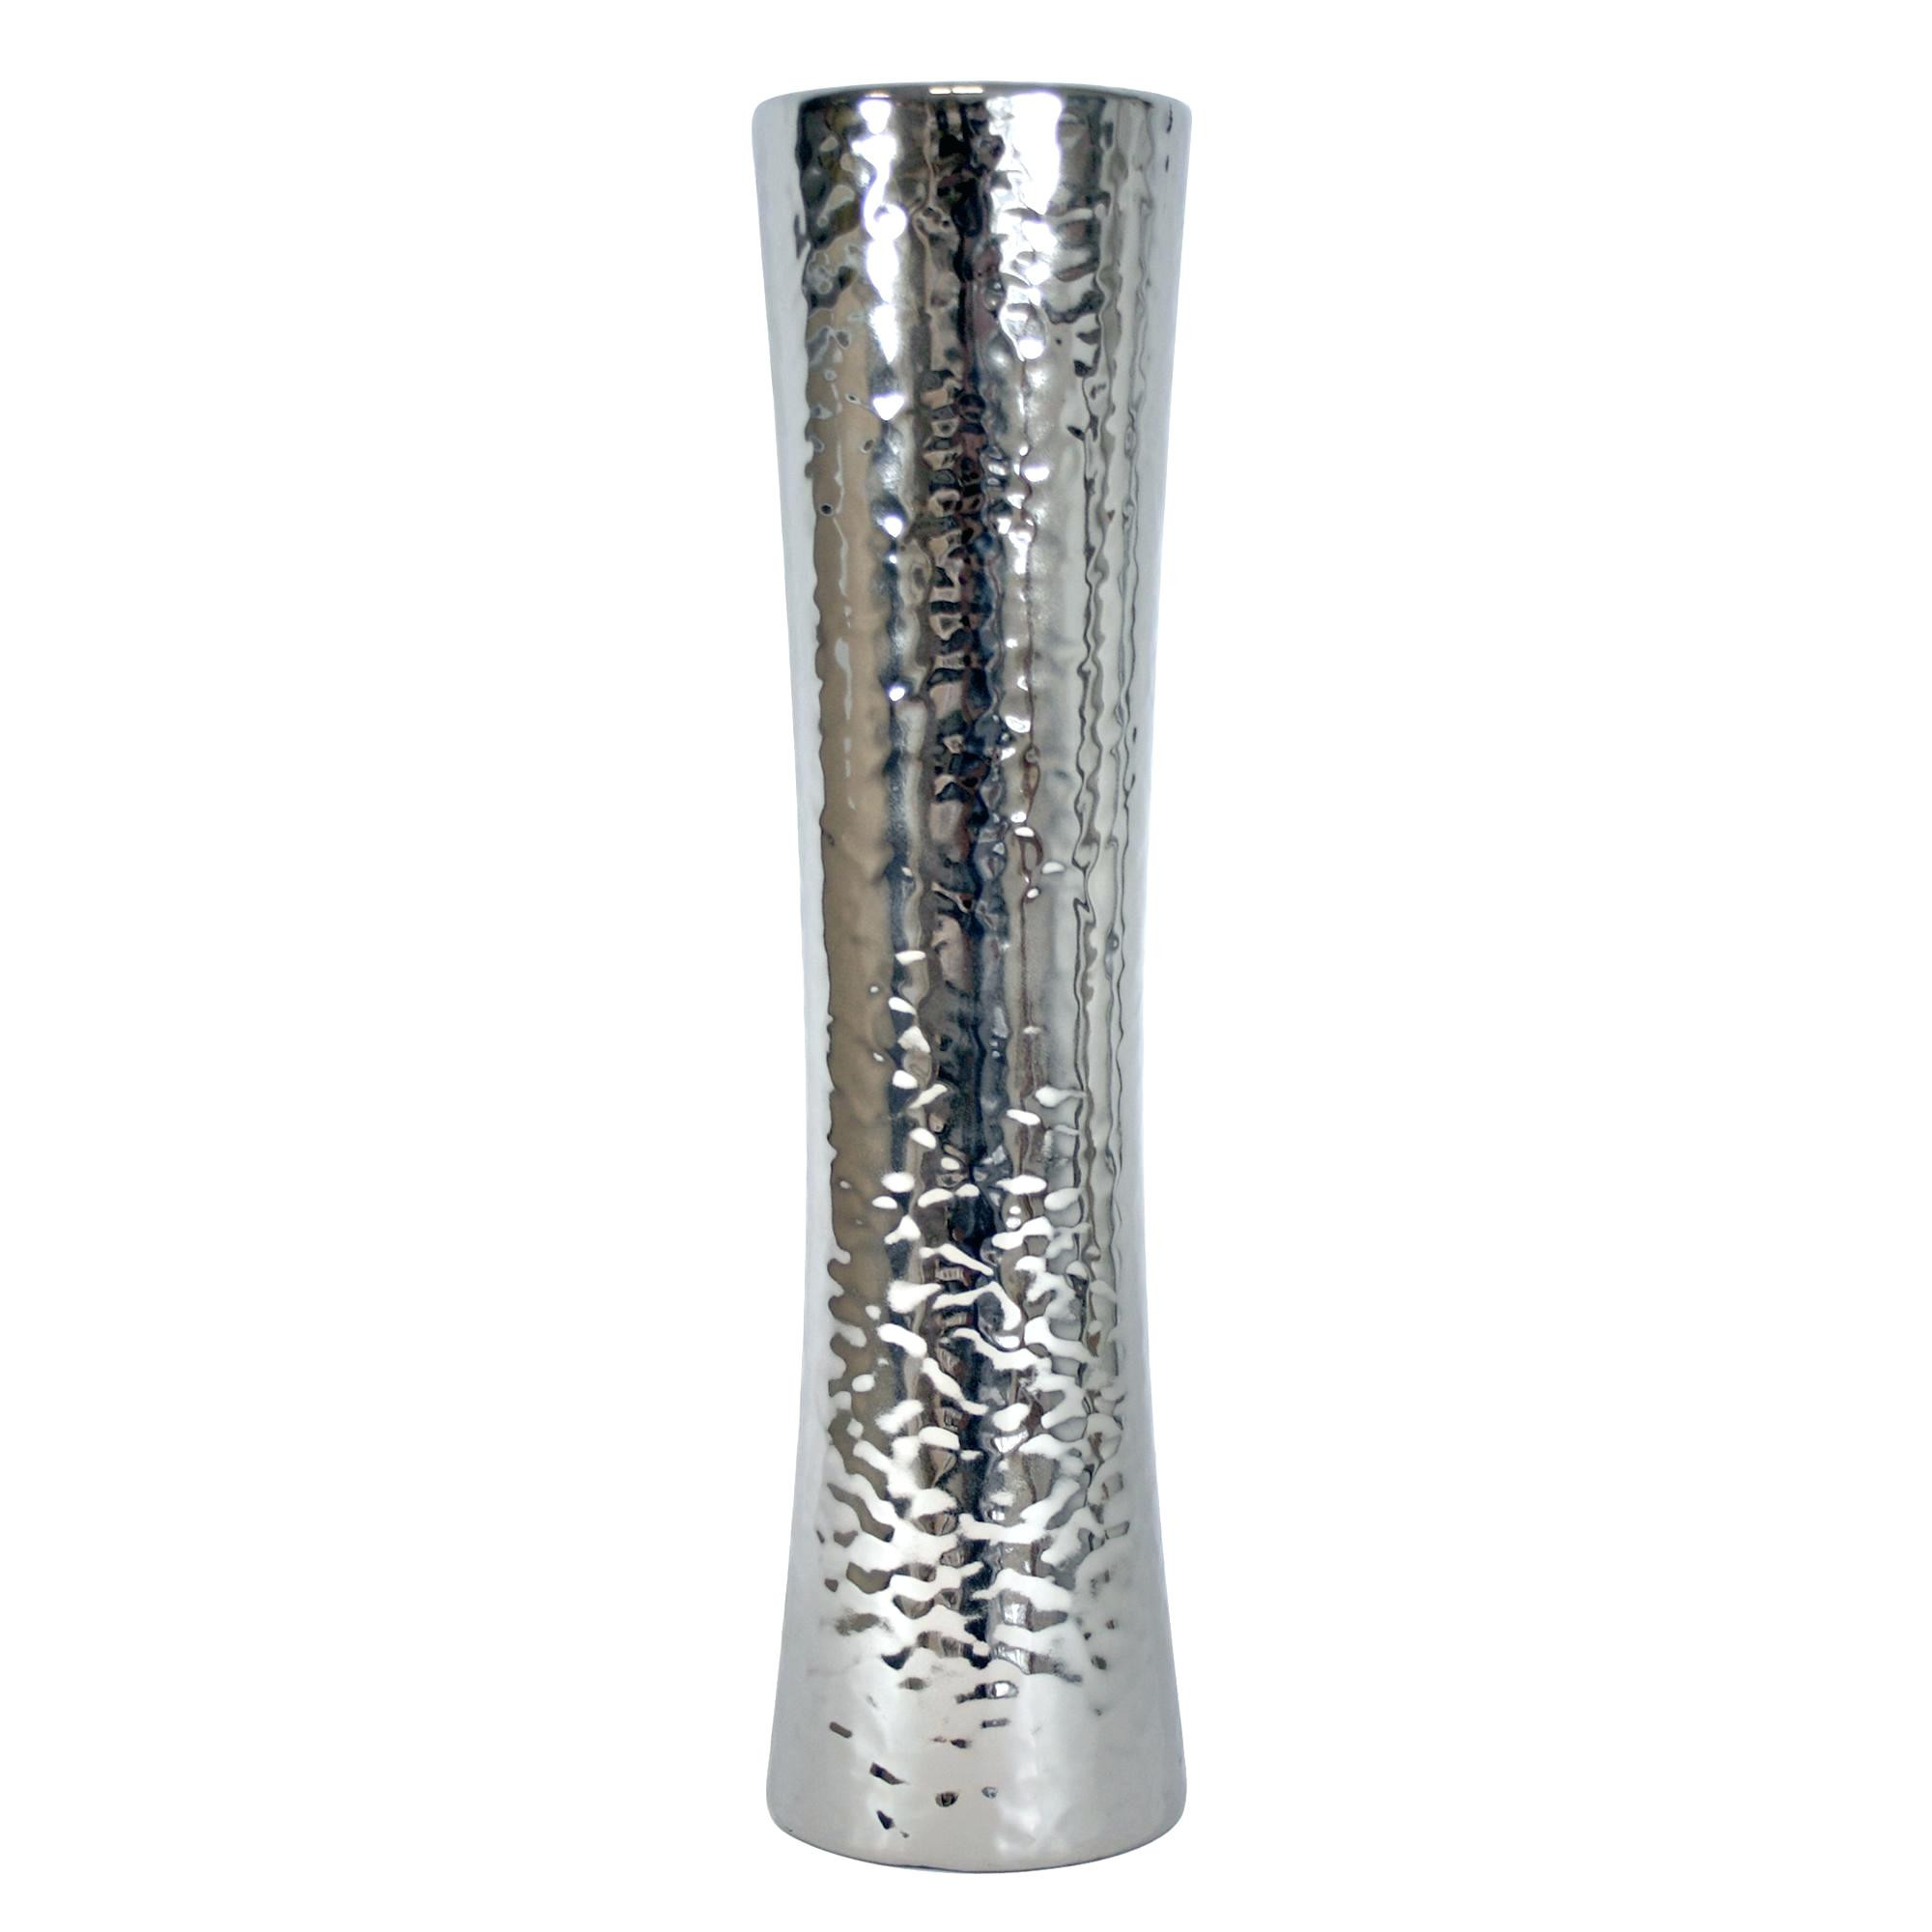 21 Recommended Tall Cylinder Vases Bulk 24 2024 free download tall cylinder vases bulk 24 of silver vases glass bulk tall wholesale flower cleanwaternetwork fl org in silver vases small wholesale for wedding centerpieces uk glass bulk